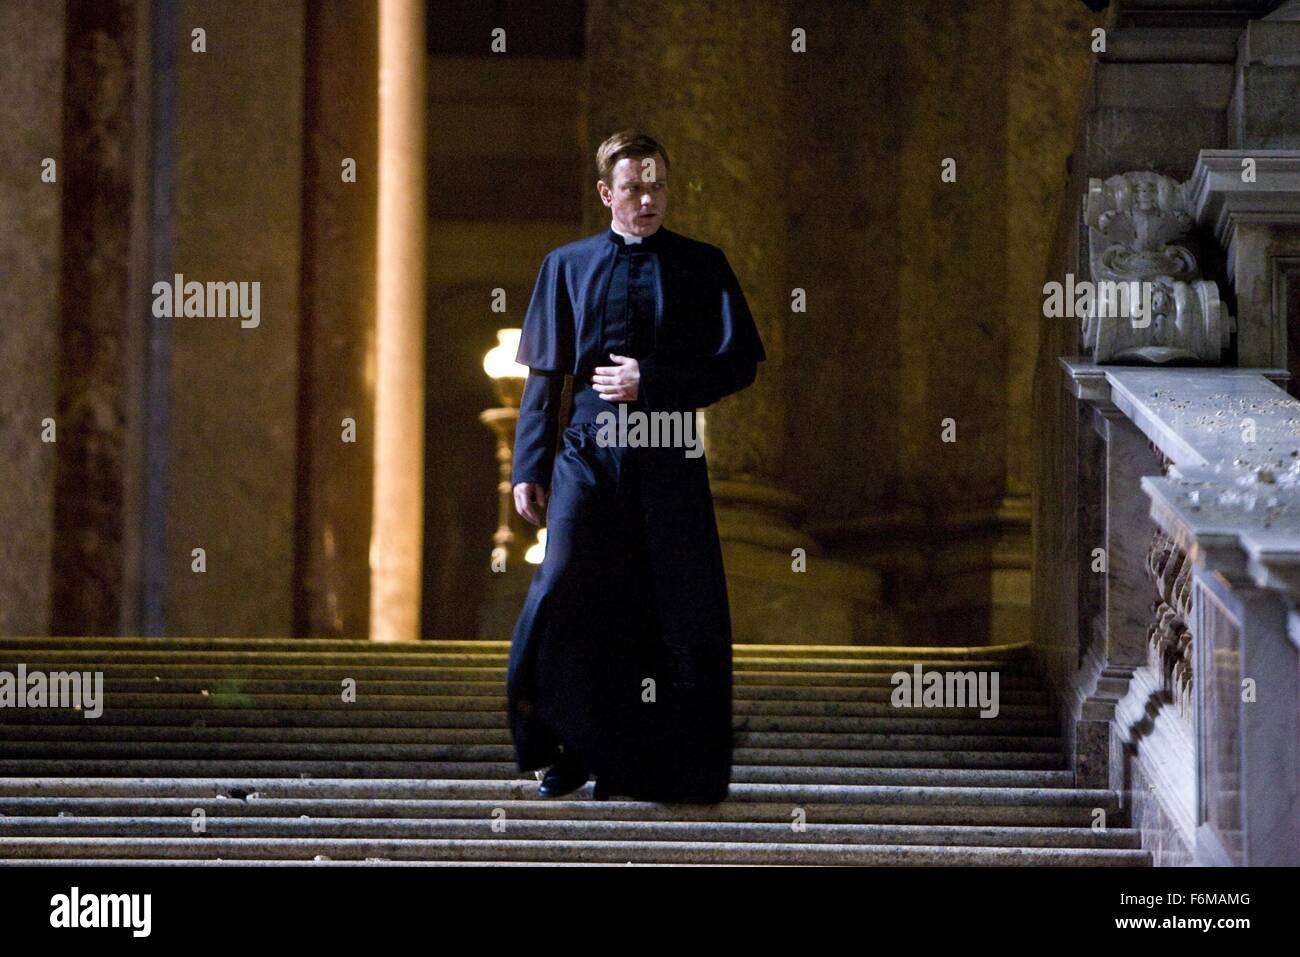 RELEASE DATE: 15 May 2009. TITLE: Angels & Demons. STUDIO: Columbia Pictures. PLOT: Harvard symbologist Robert Langdon works to solve a murder and prevent a terrorist act against the Vatican. PICTURED: EWAN MCGREGOR as Camerlengo Patrick McKenna. Stock Photo